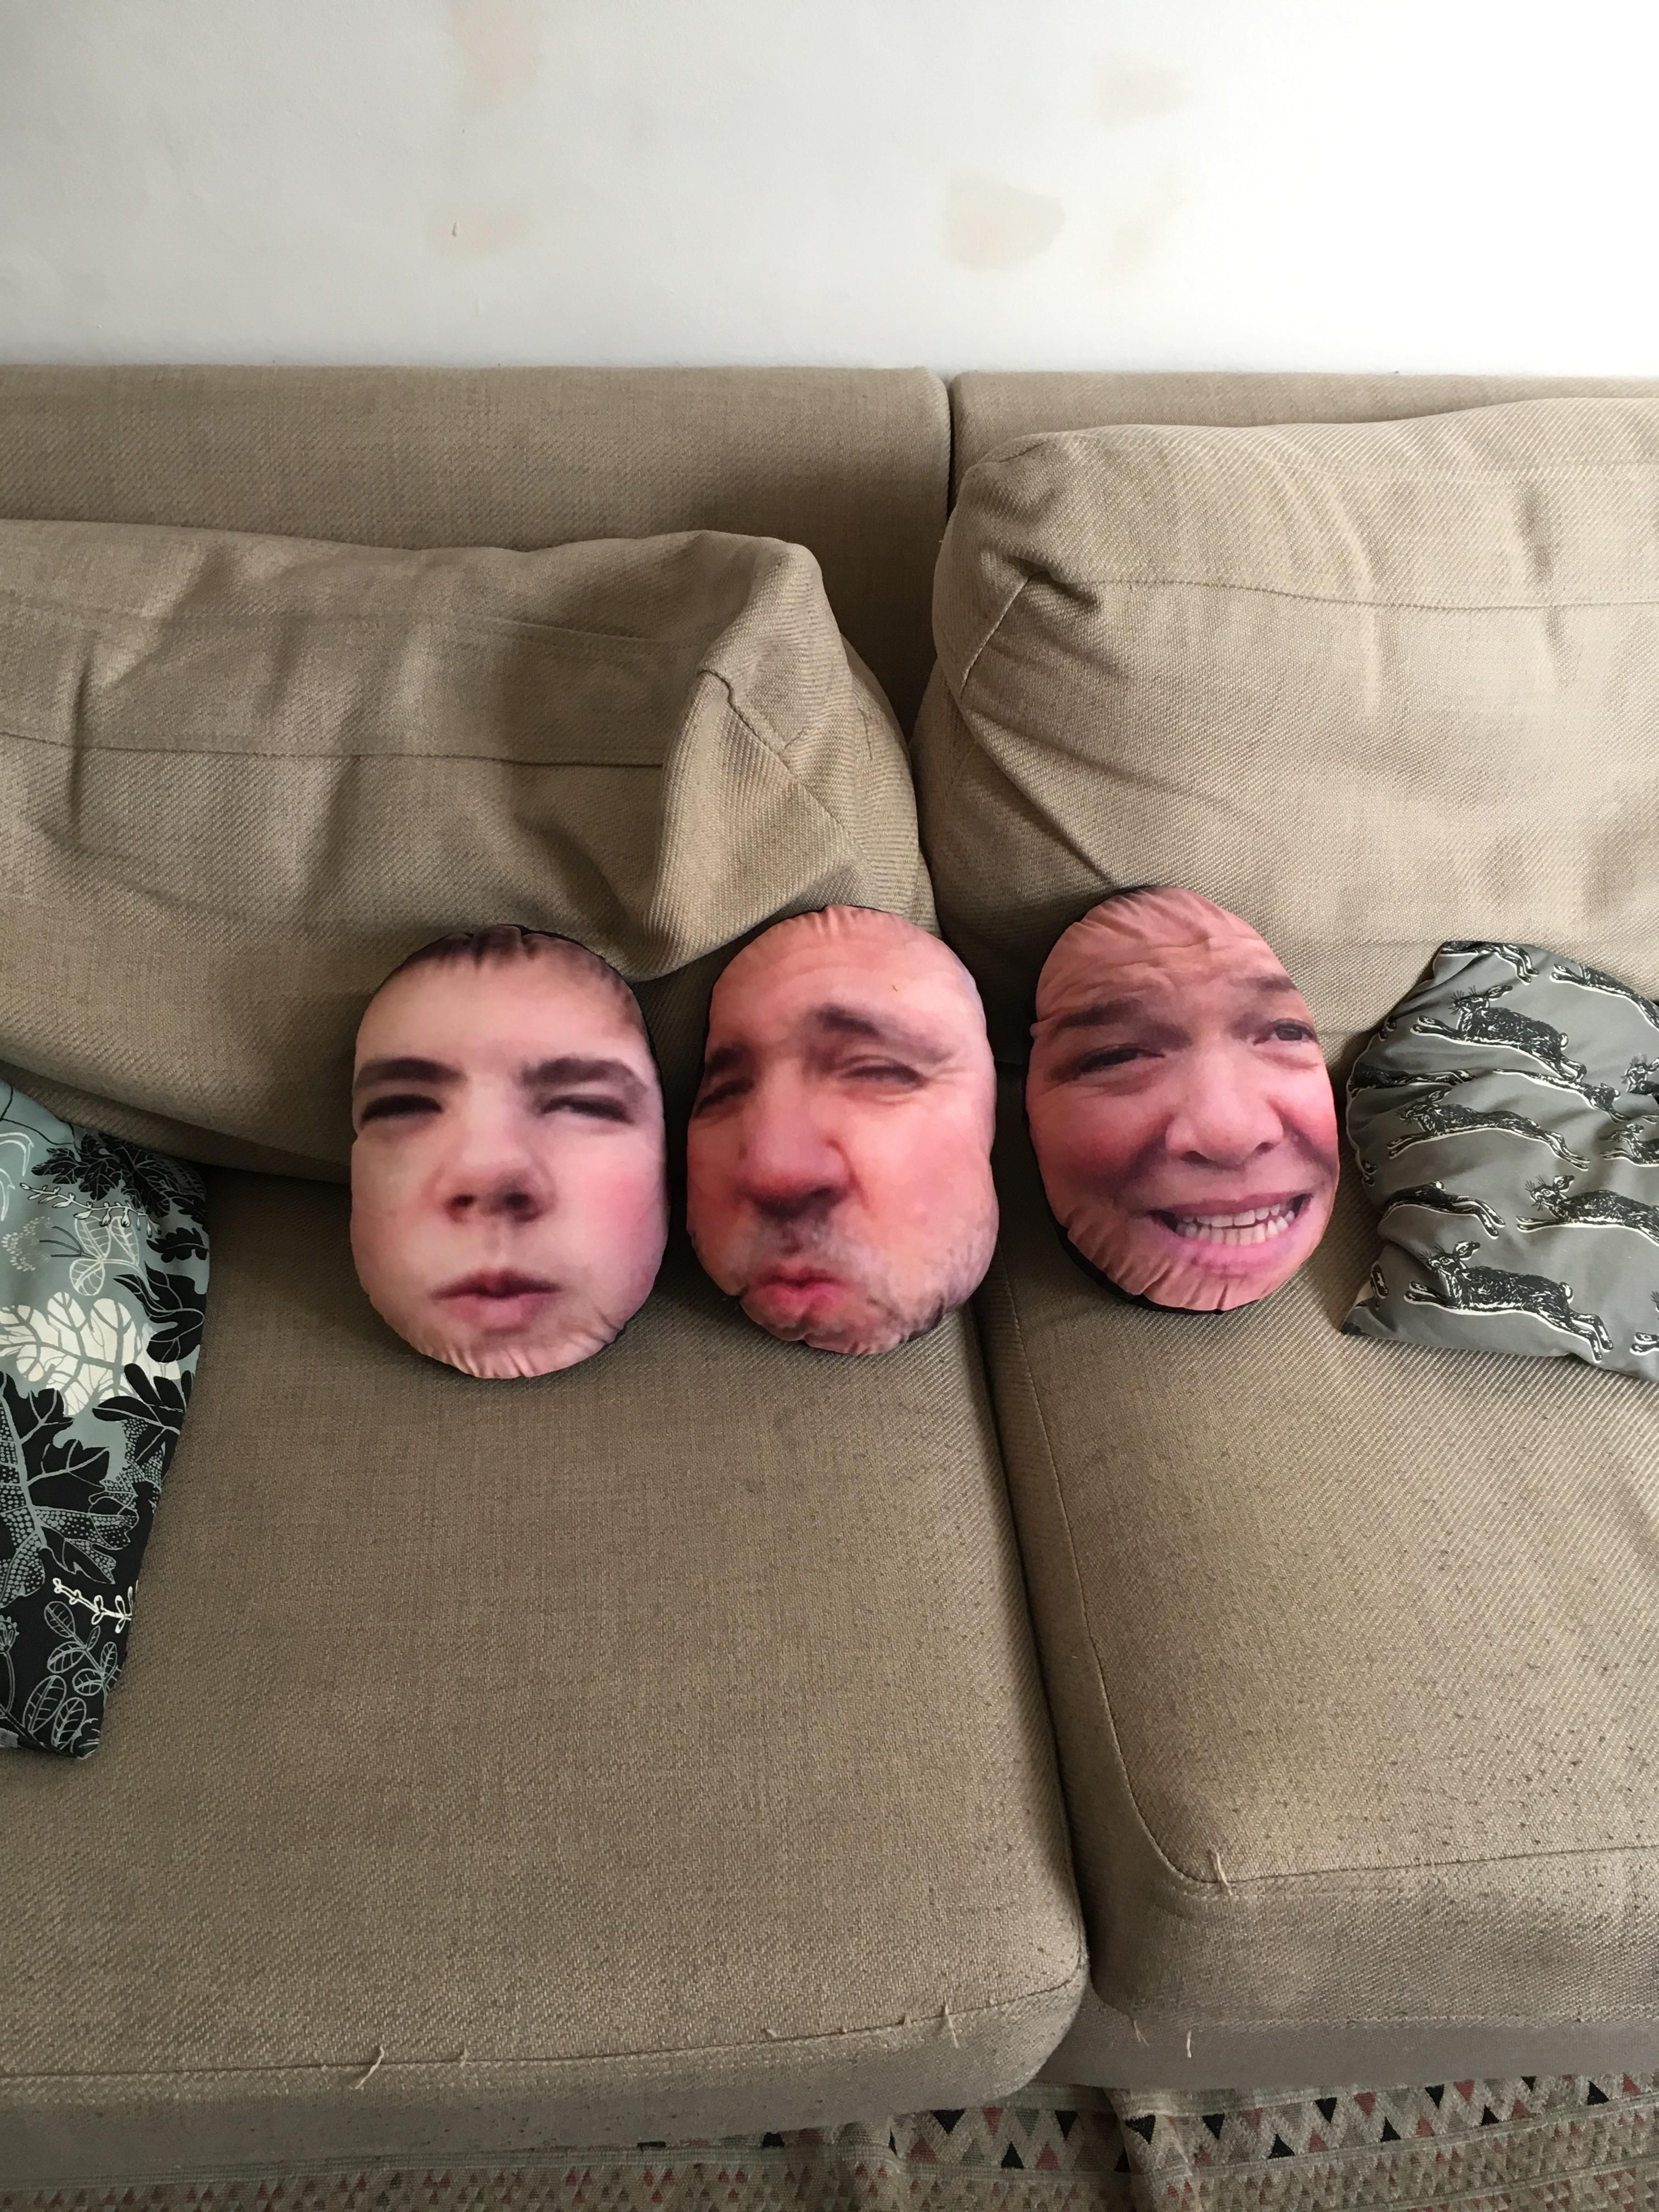 My Aunt, Uncle and Cousin had their faces printed on pillows...